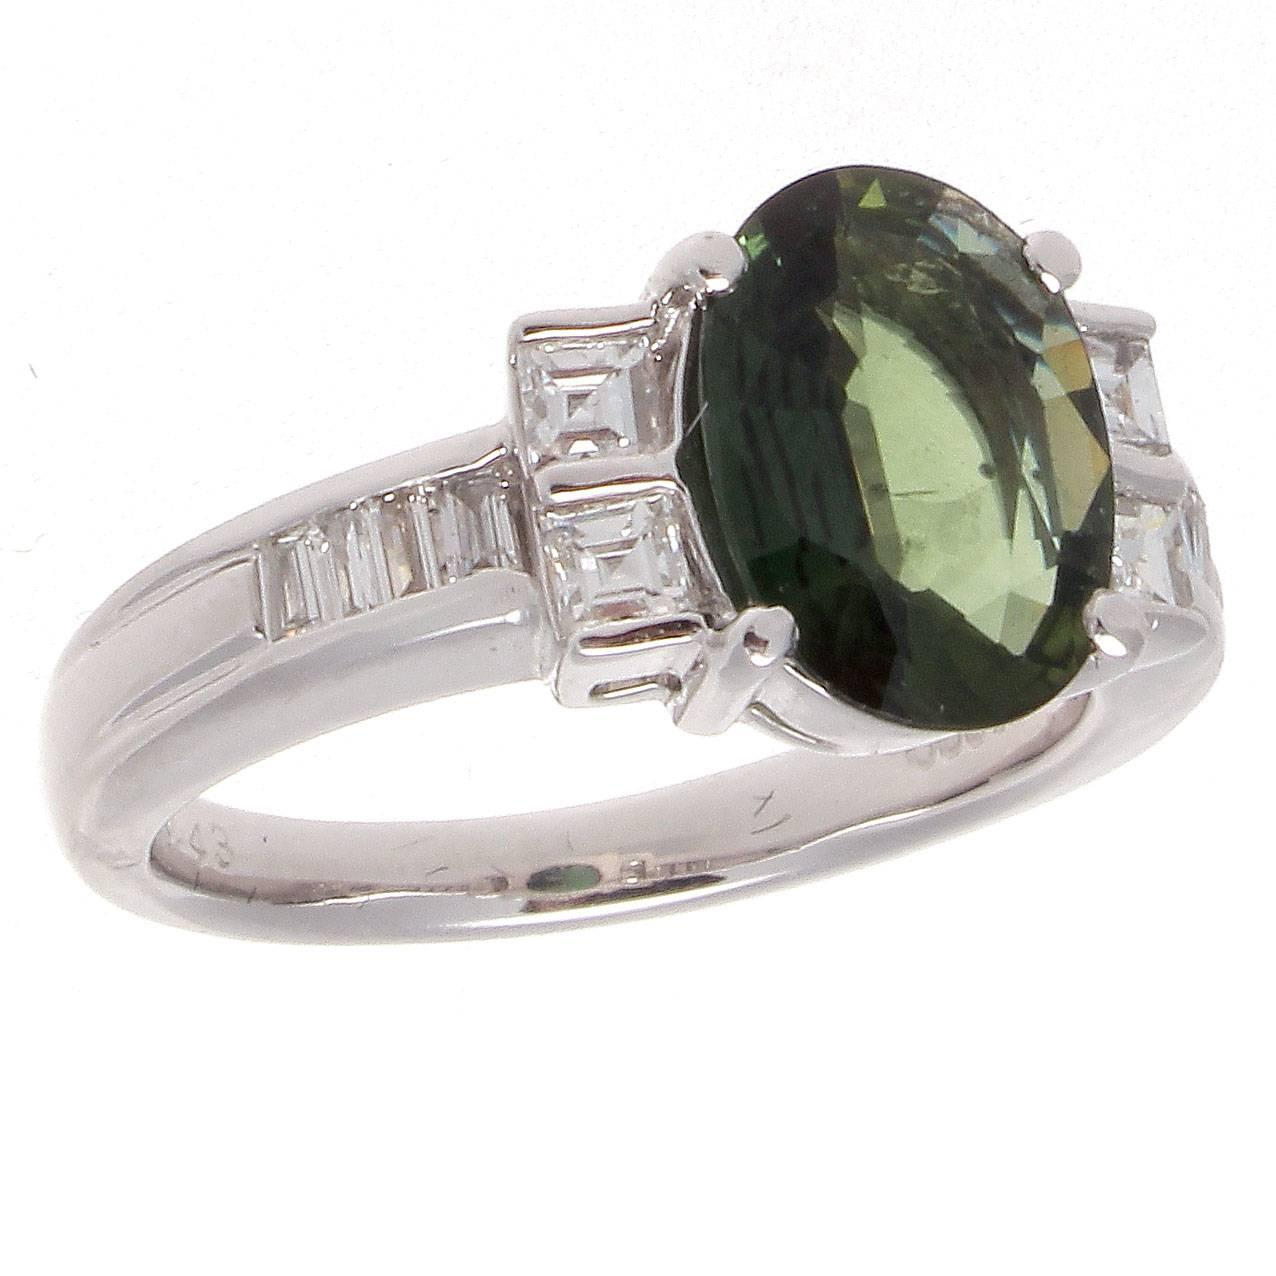 Colored stones are part of the new wave of modern nontraditional engagement rings, setting you apart from the rest of the crowd. Featuring a vibrant forest green sapphire that is accented by  an array of colorless emerald cut diamonds varying in